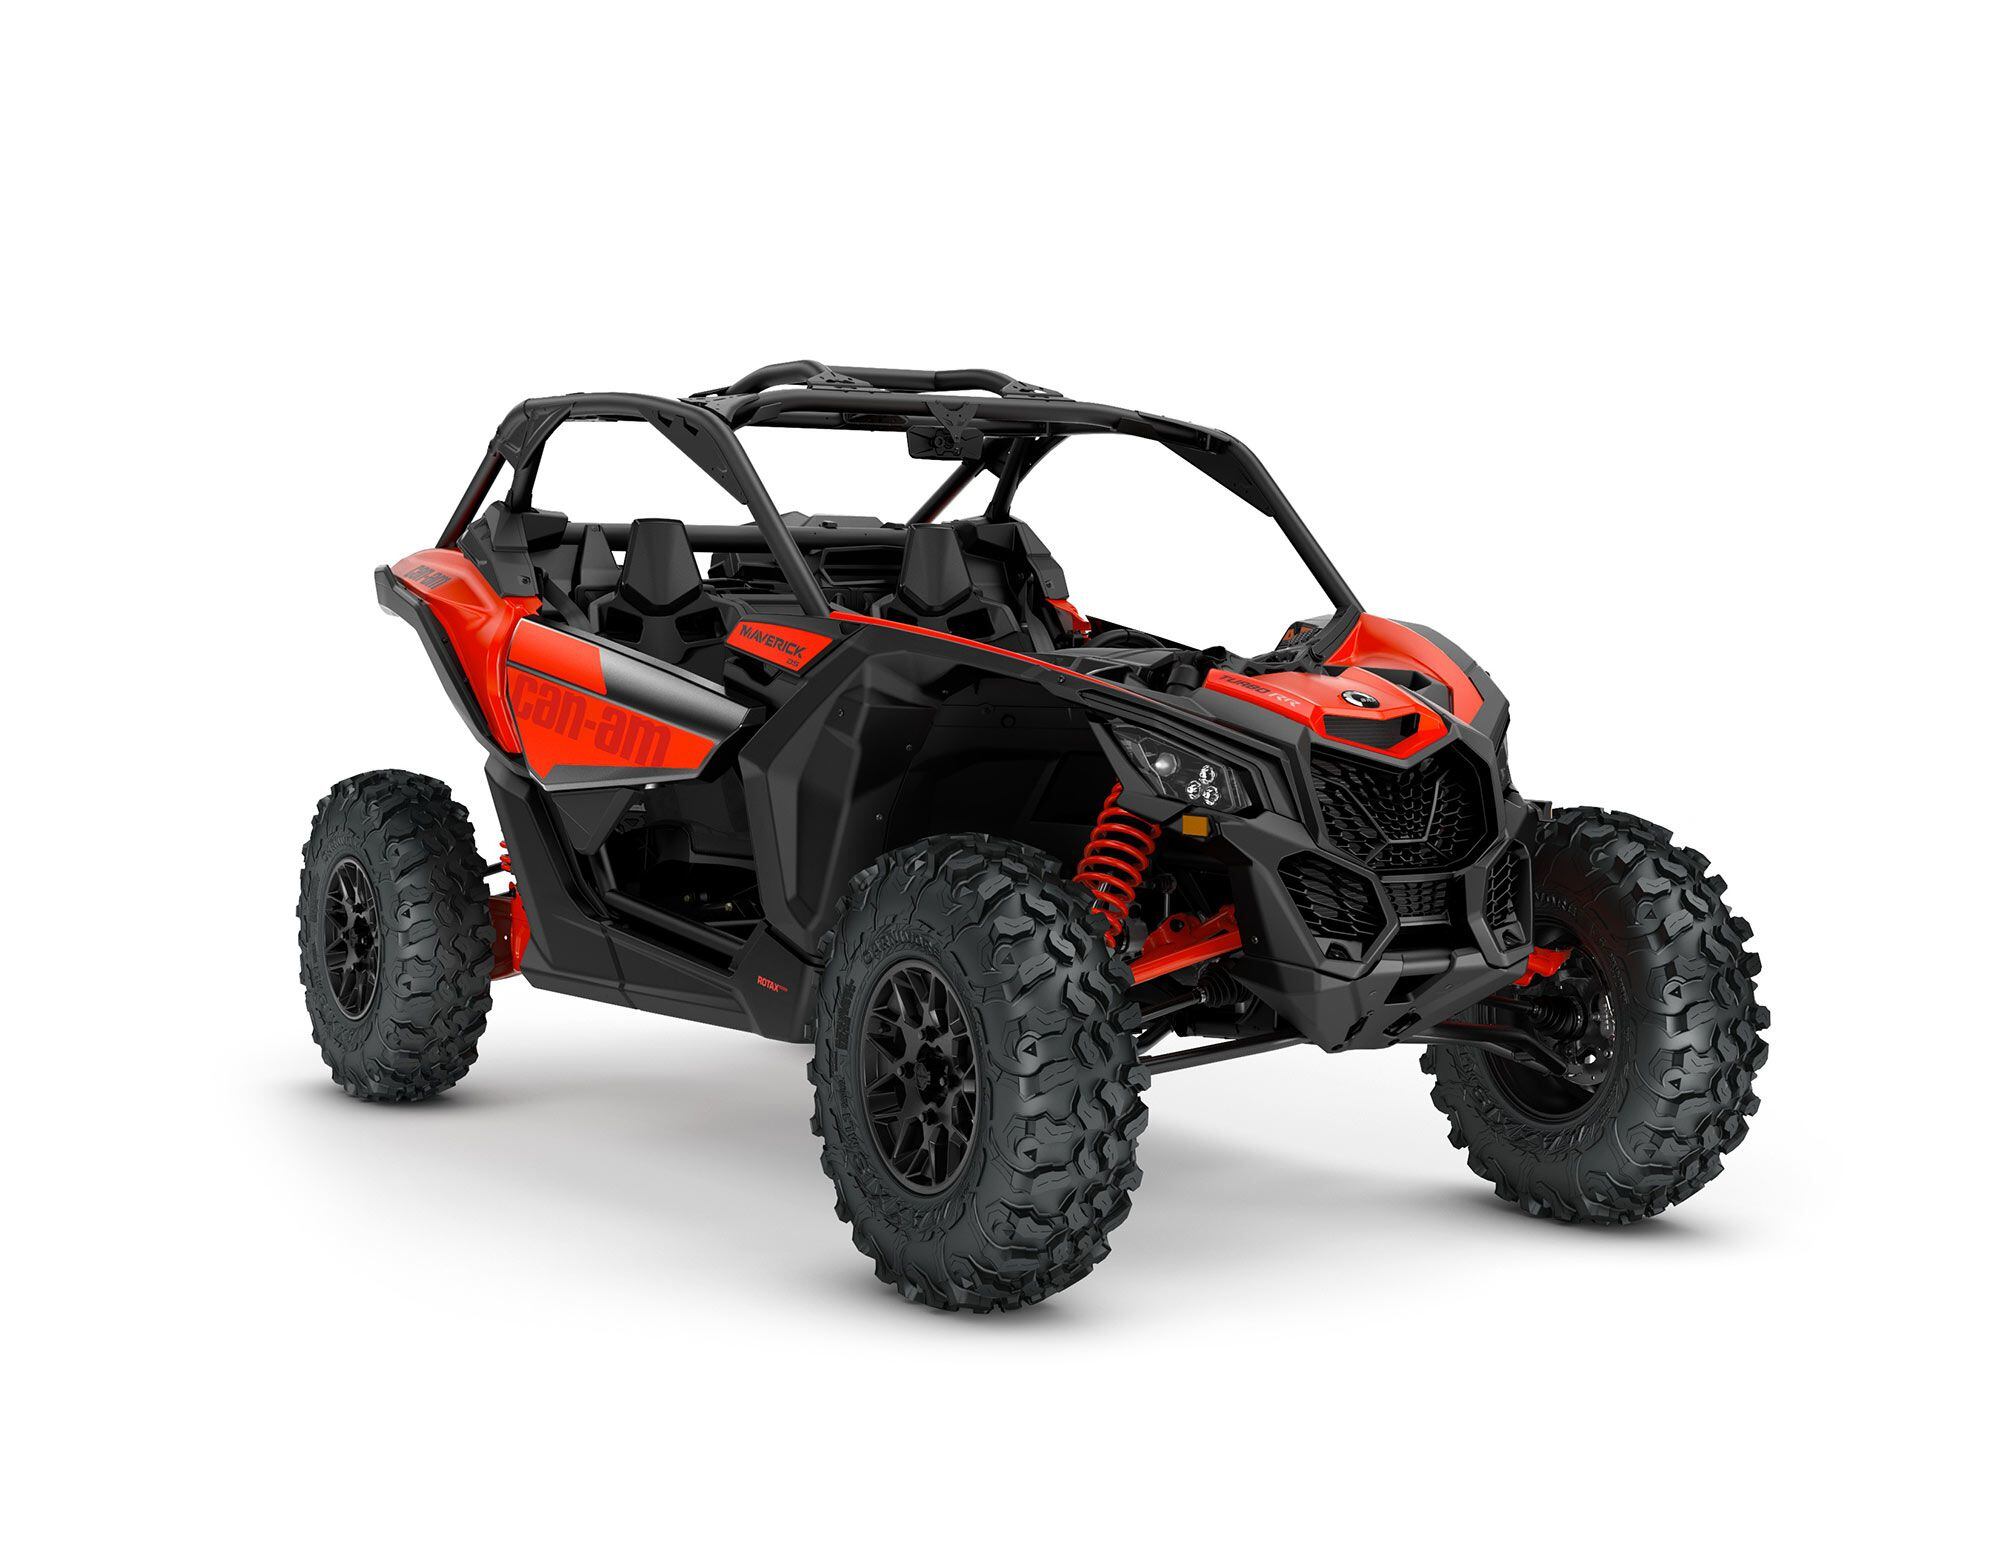 2022 Can-Am Maverick X3 X DS Turbo RR front view in Can-Am Red color.